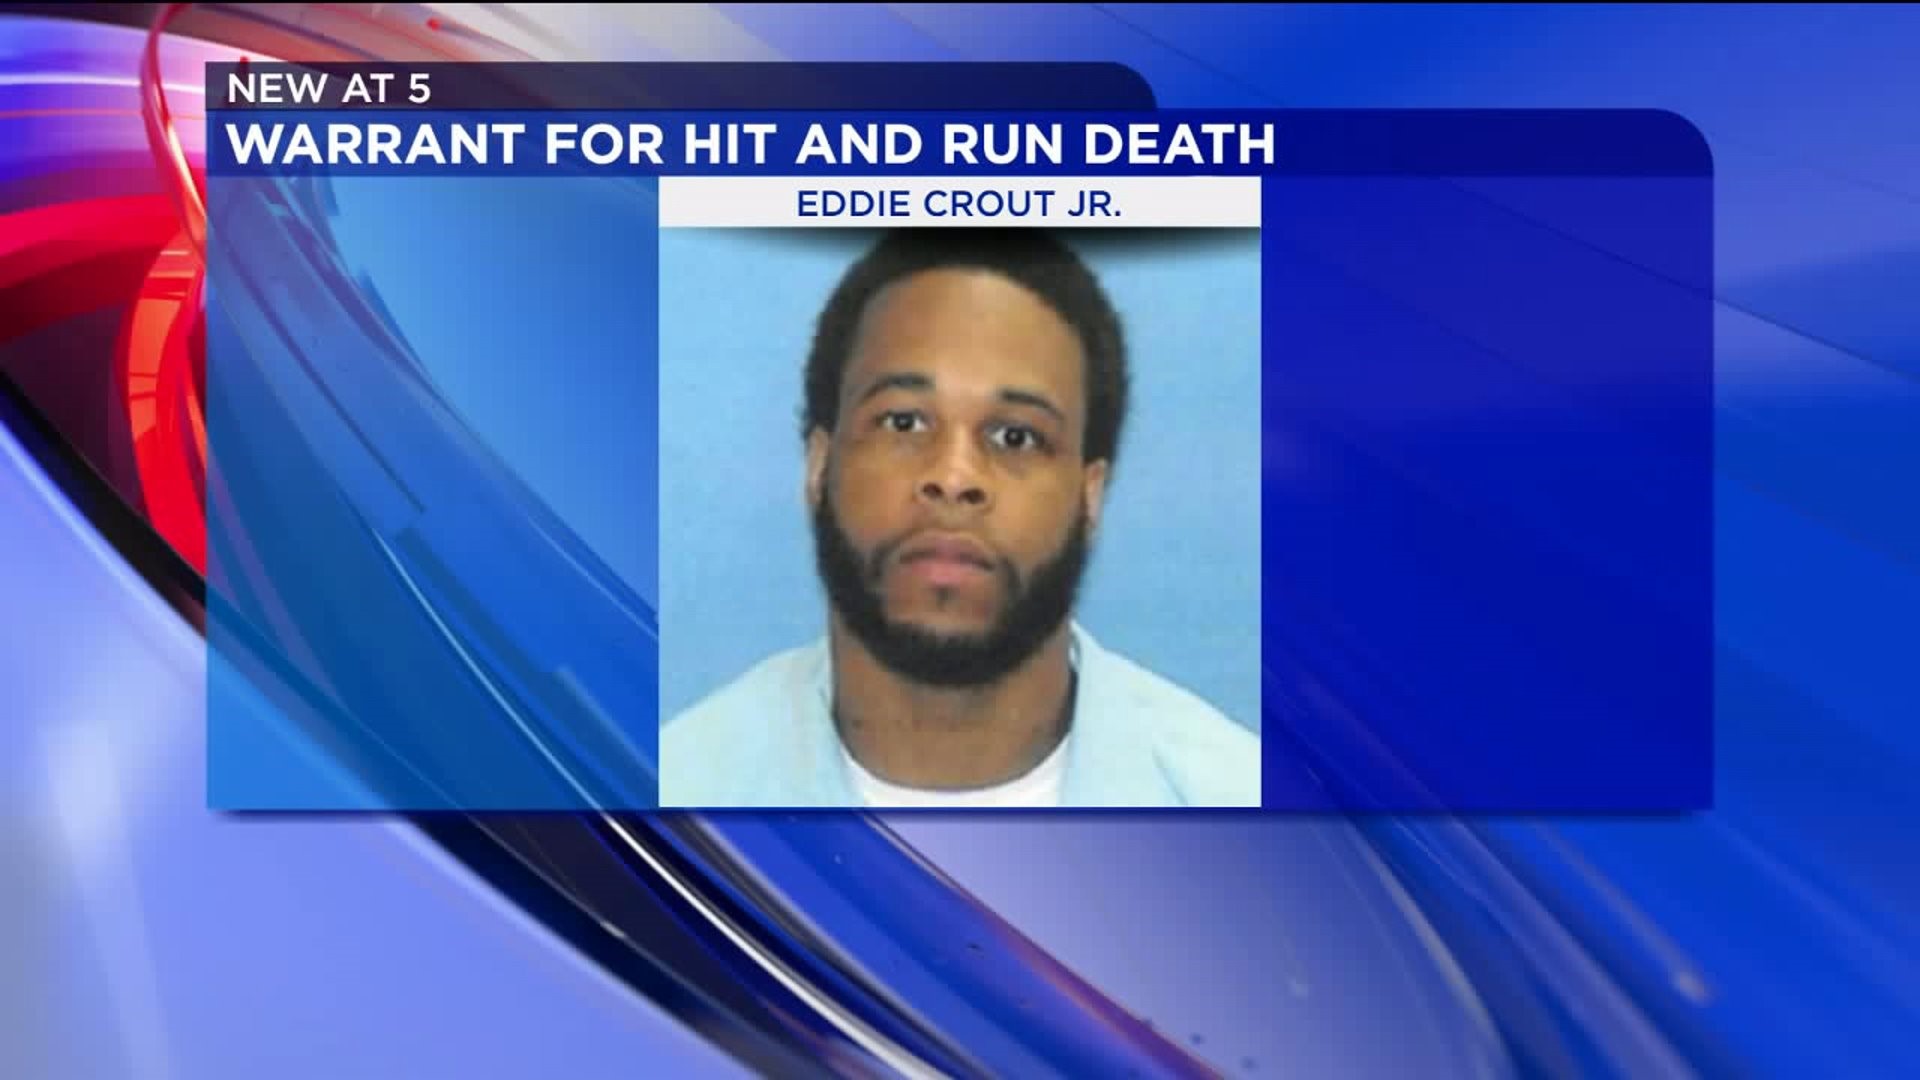 Clinton Man Wanted for Hit and Run Death